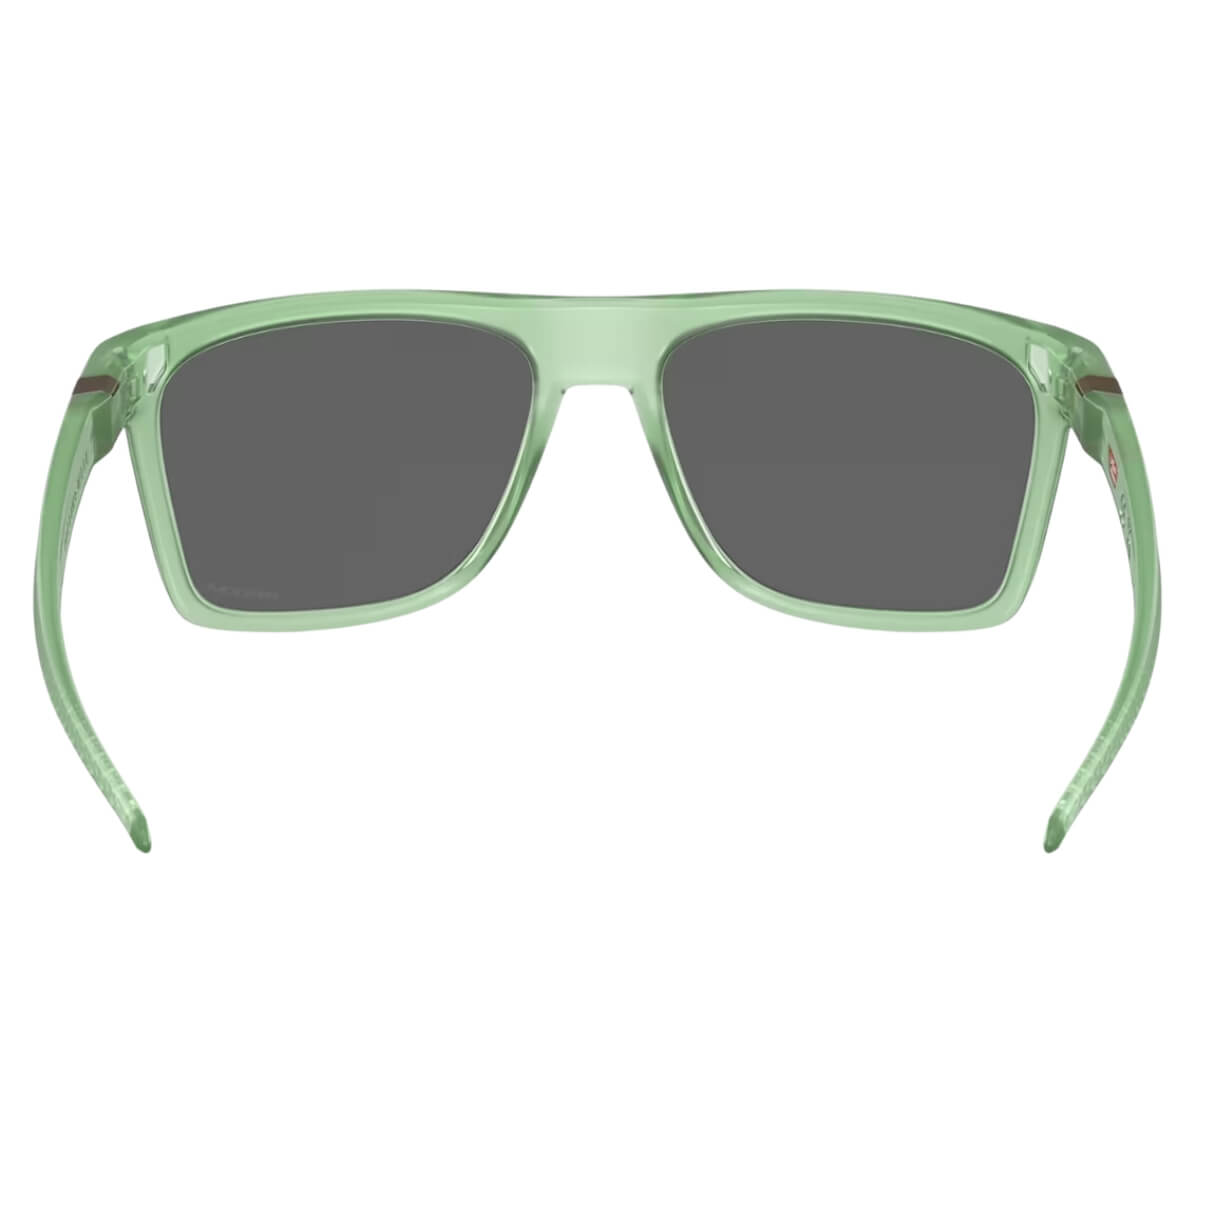 Oakley OO9100 Leffingwell 910017 Sunglasses - Matte Jade with Prizm Lens Back View